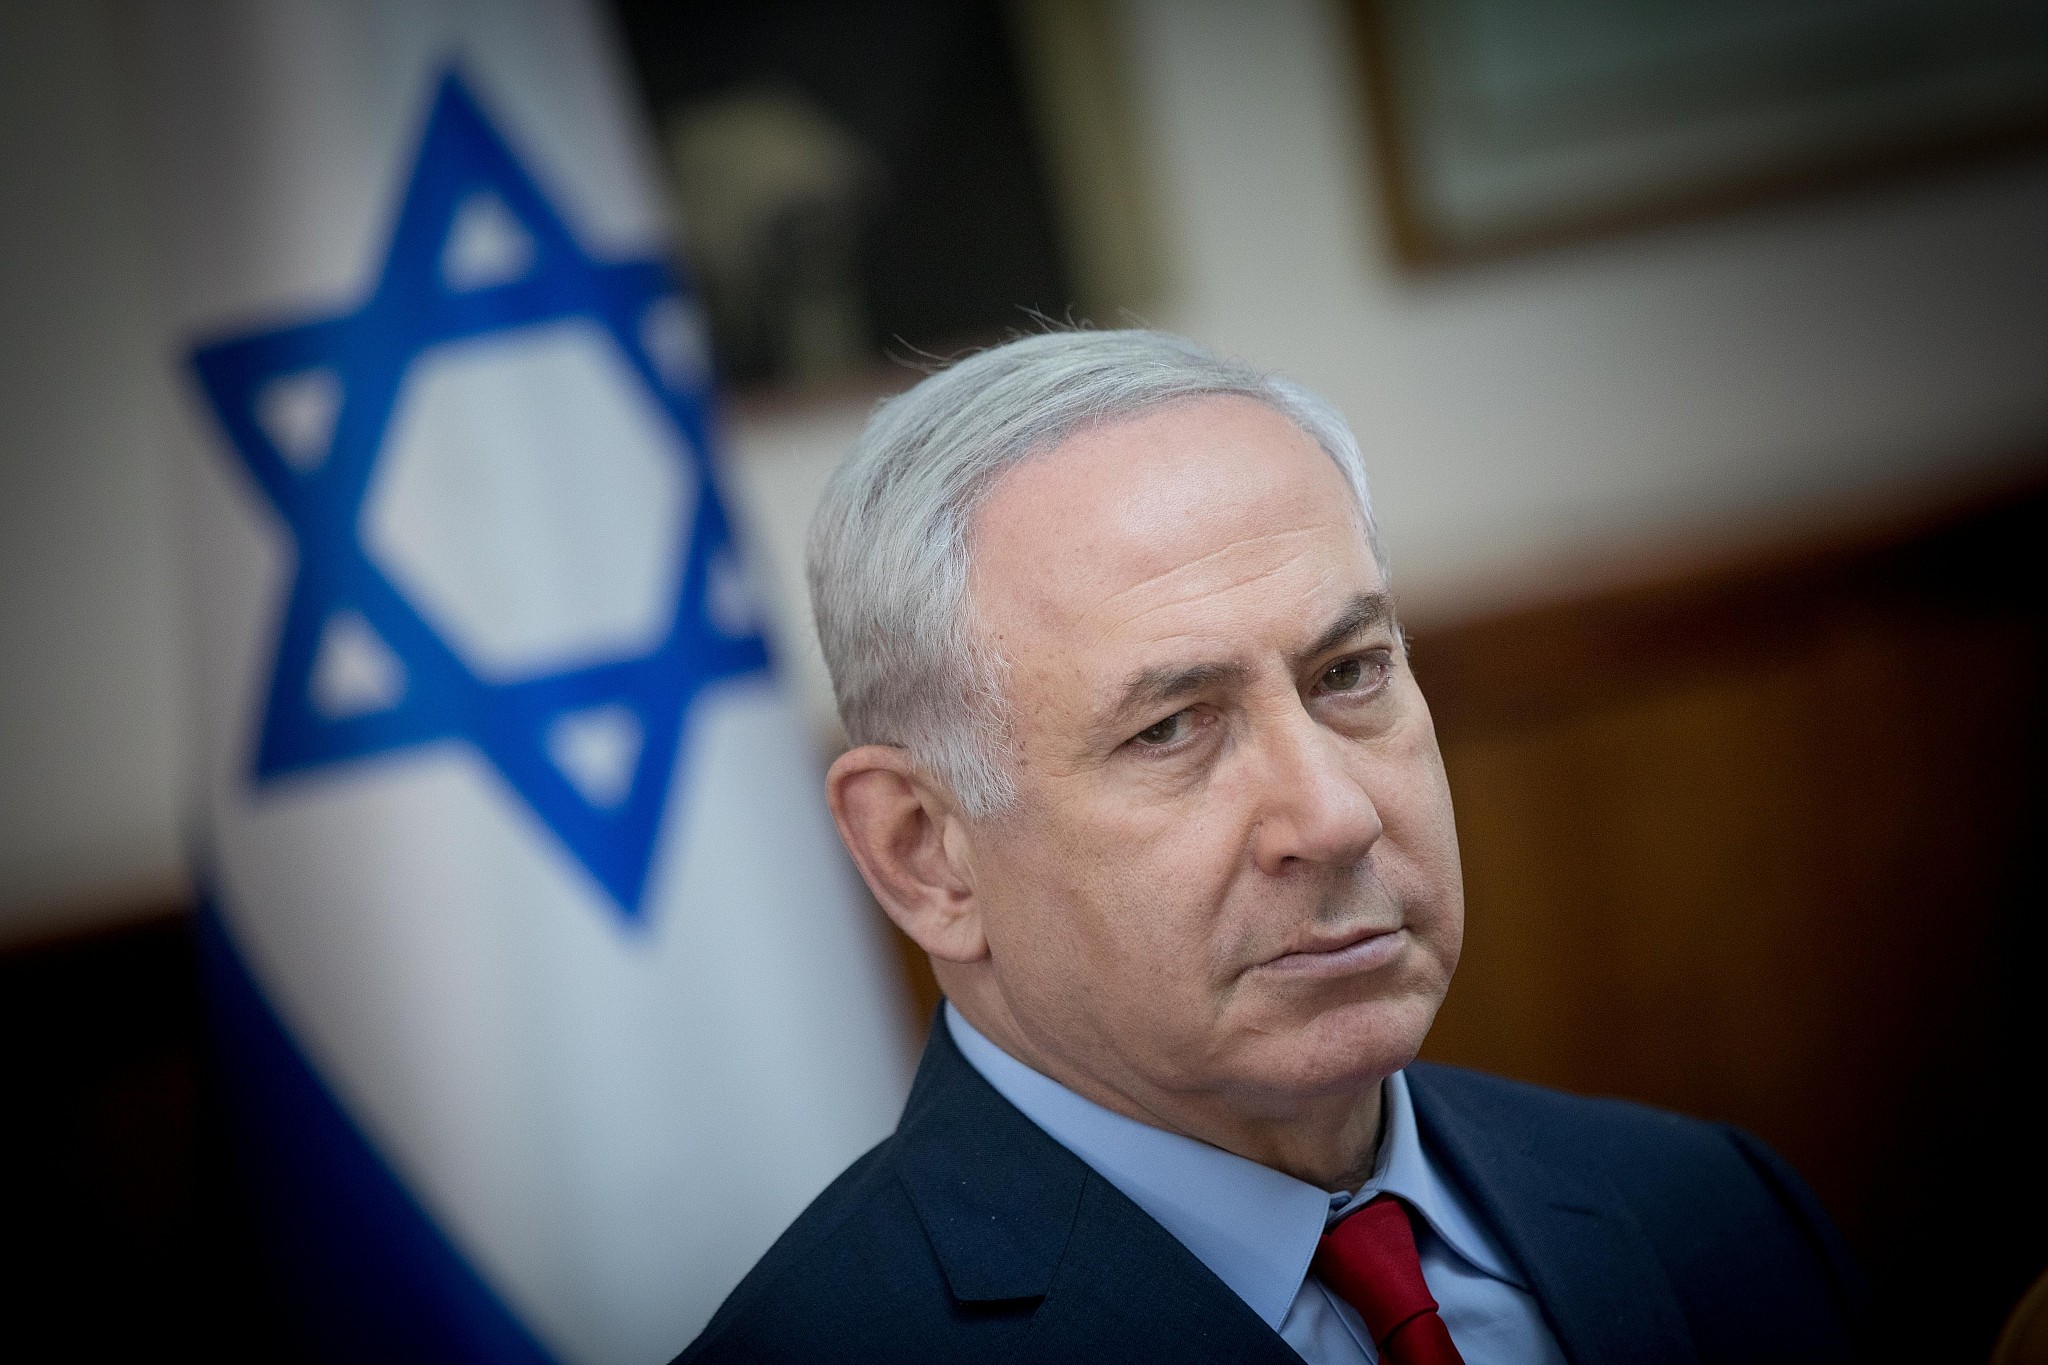 Vast Majority of Israelis Seek Netanyahu's Resignation, Survey Reveals  In a recent turn of events that has captured both local and international attention, a significant majority of Israeli citizens appear to be clamoring for a change in their country's leadership. A staggering 76% of Israelis are calling for the resignation of Prime Minister Benjamin Netanyahu, according to a survey highlighted by Israeli media outlets. This desire for political turnover comes amid a complex backdrop of ongoing tensions and conflicts in the region.